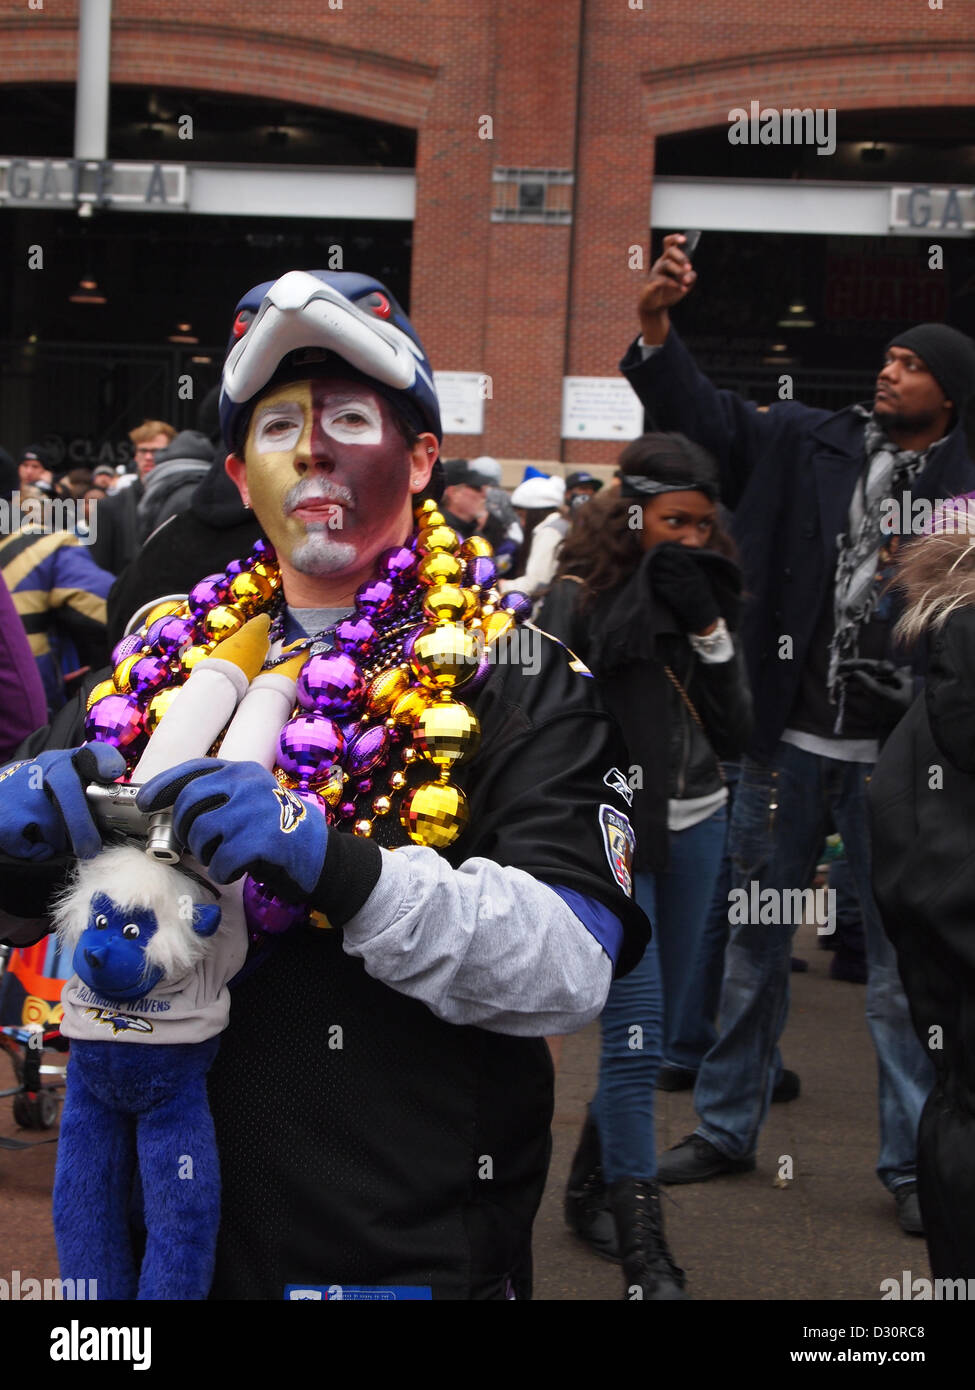 A Baltimore Ravens football team fan celebrates while wearing festive beads and makeup in the teams purple and gold colors outside the Ravens M and T Bank Stadium in Baltimore, Maryland on Feb. 5, 2013. Stock Photo